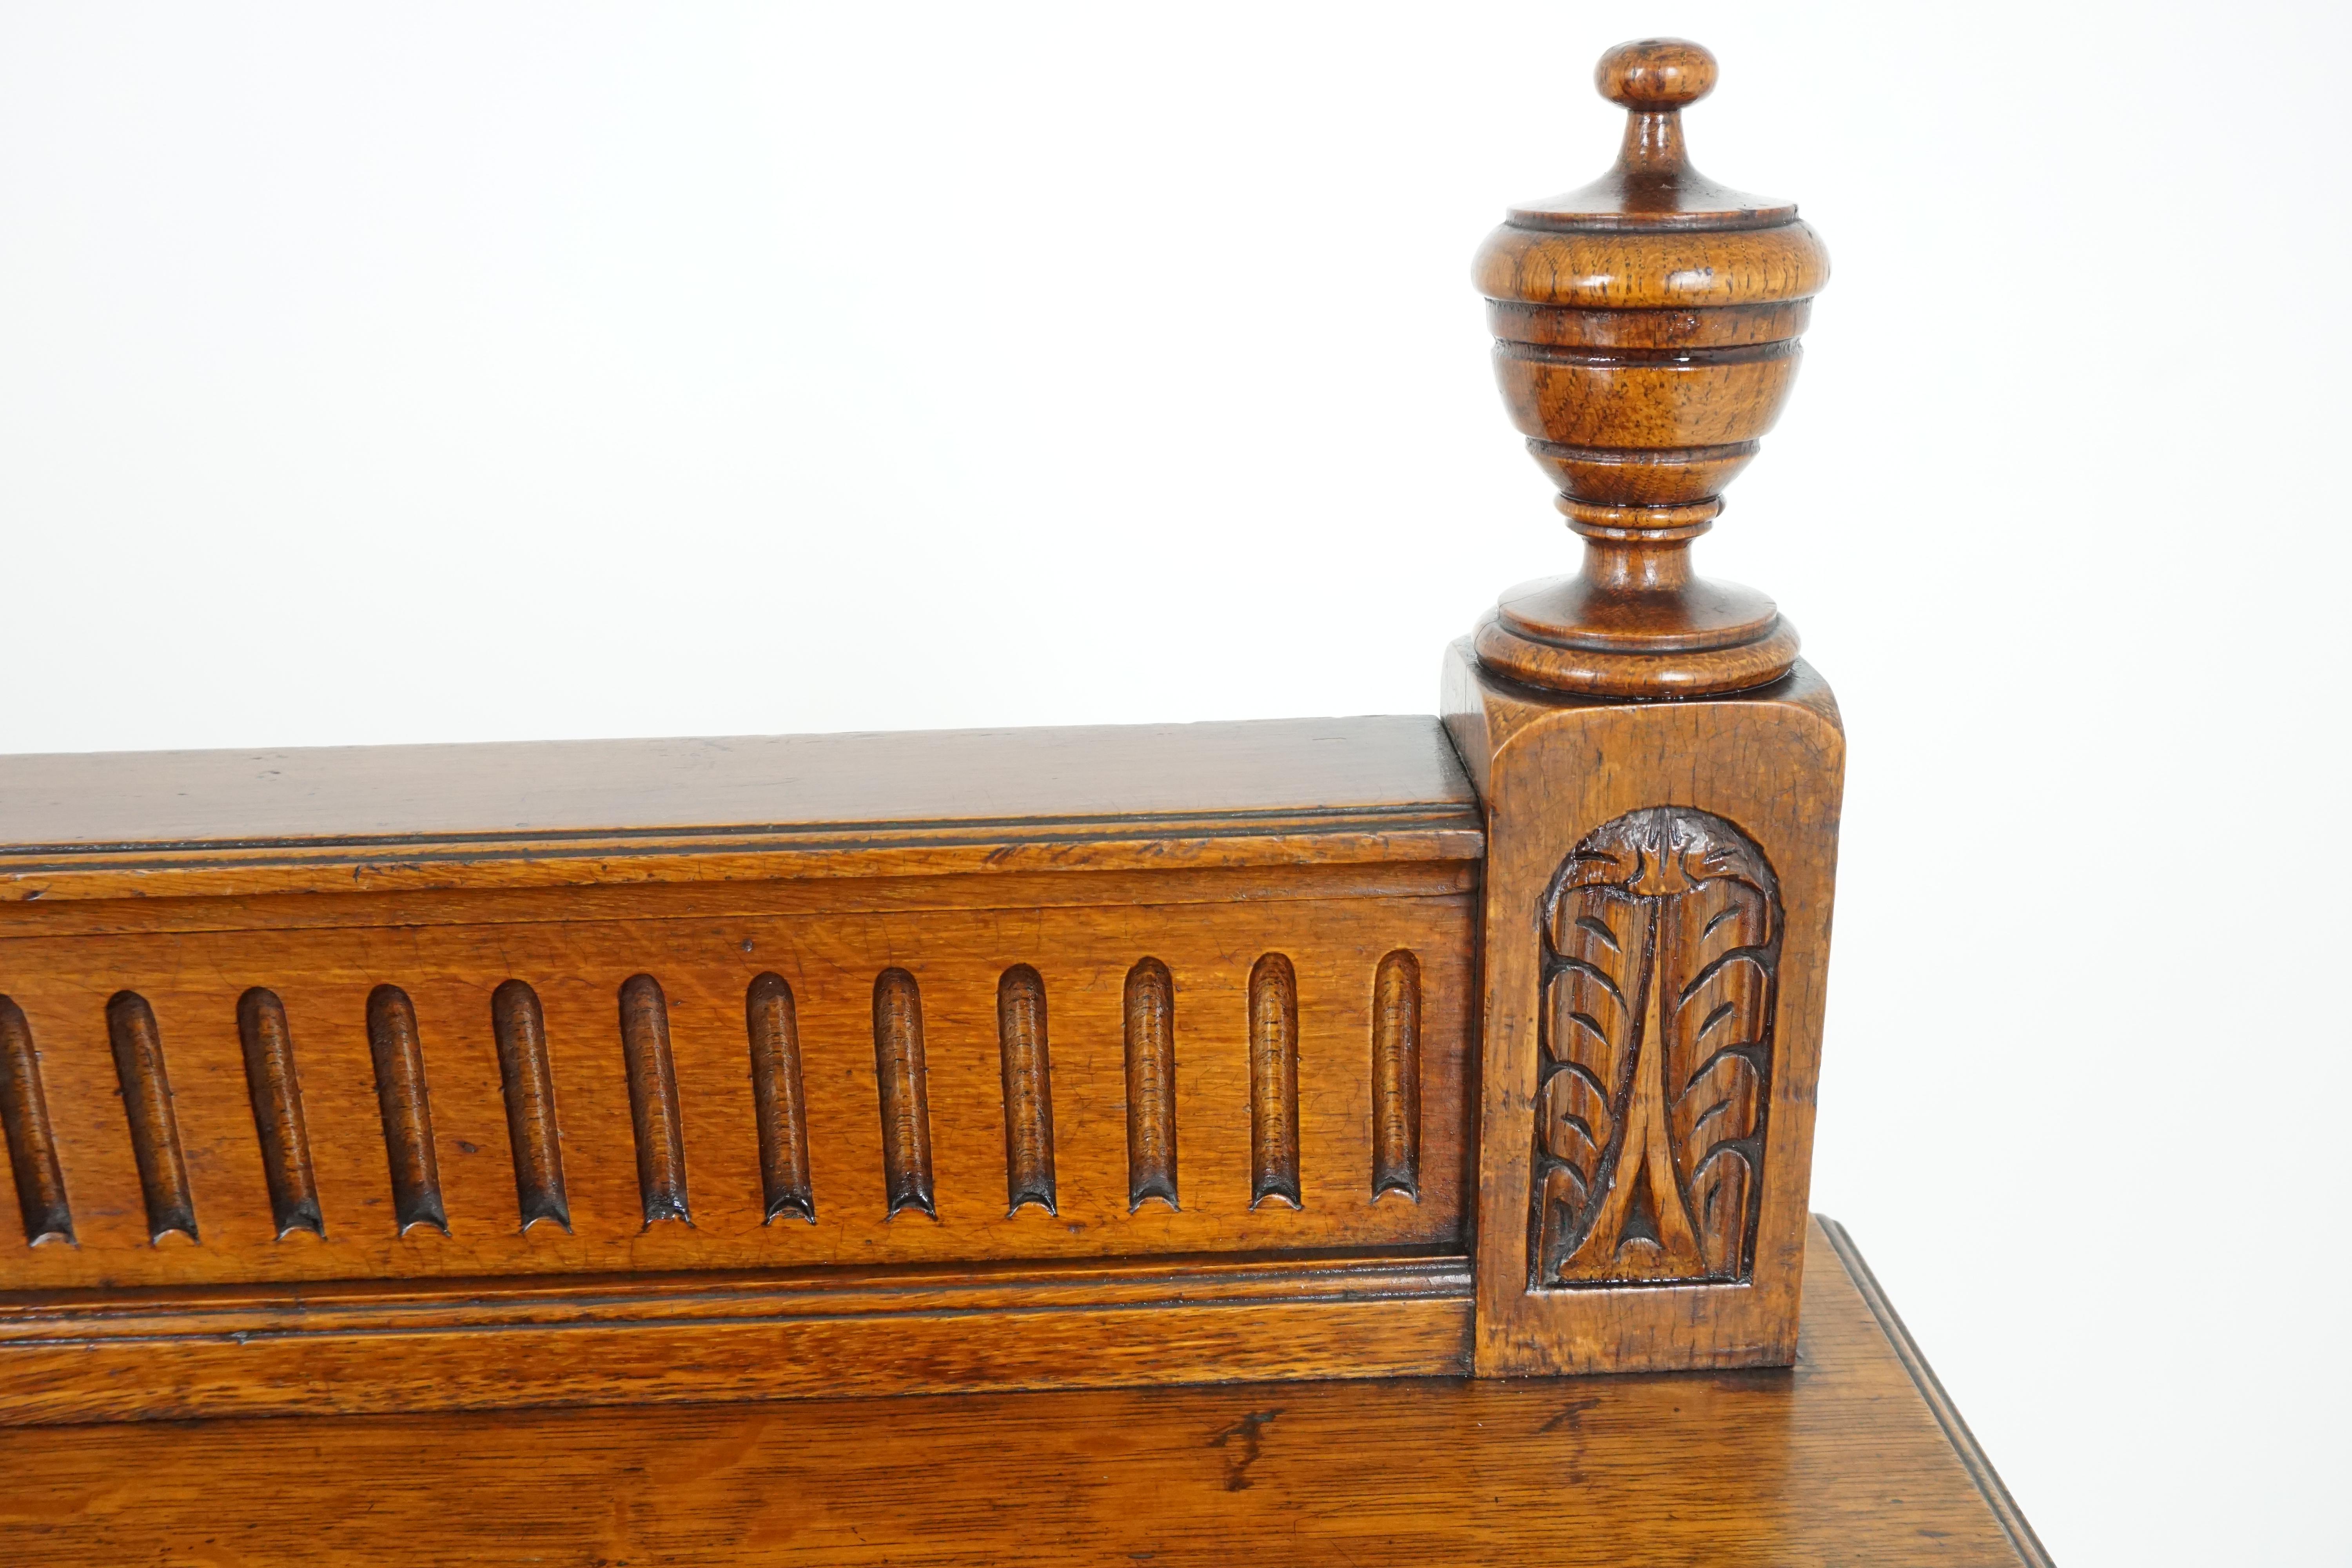 Antique Oak server sideboard, Victorian 3-tier sideboard buffet, antique furniture, Scotland 1880, B1849

Scotland 1880
Solid oak
Original finish
Rectangular top
Carved pediment to the back with finials
Two open shelves below
Turned supports